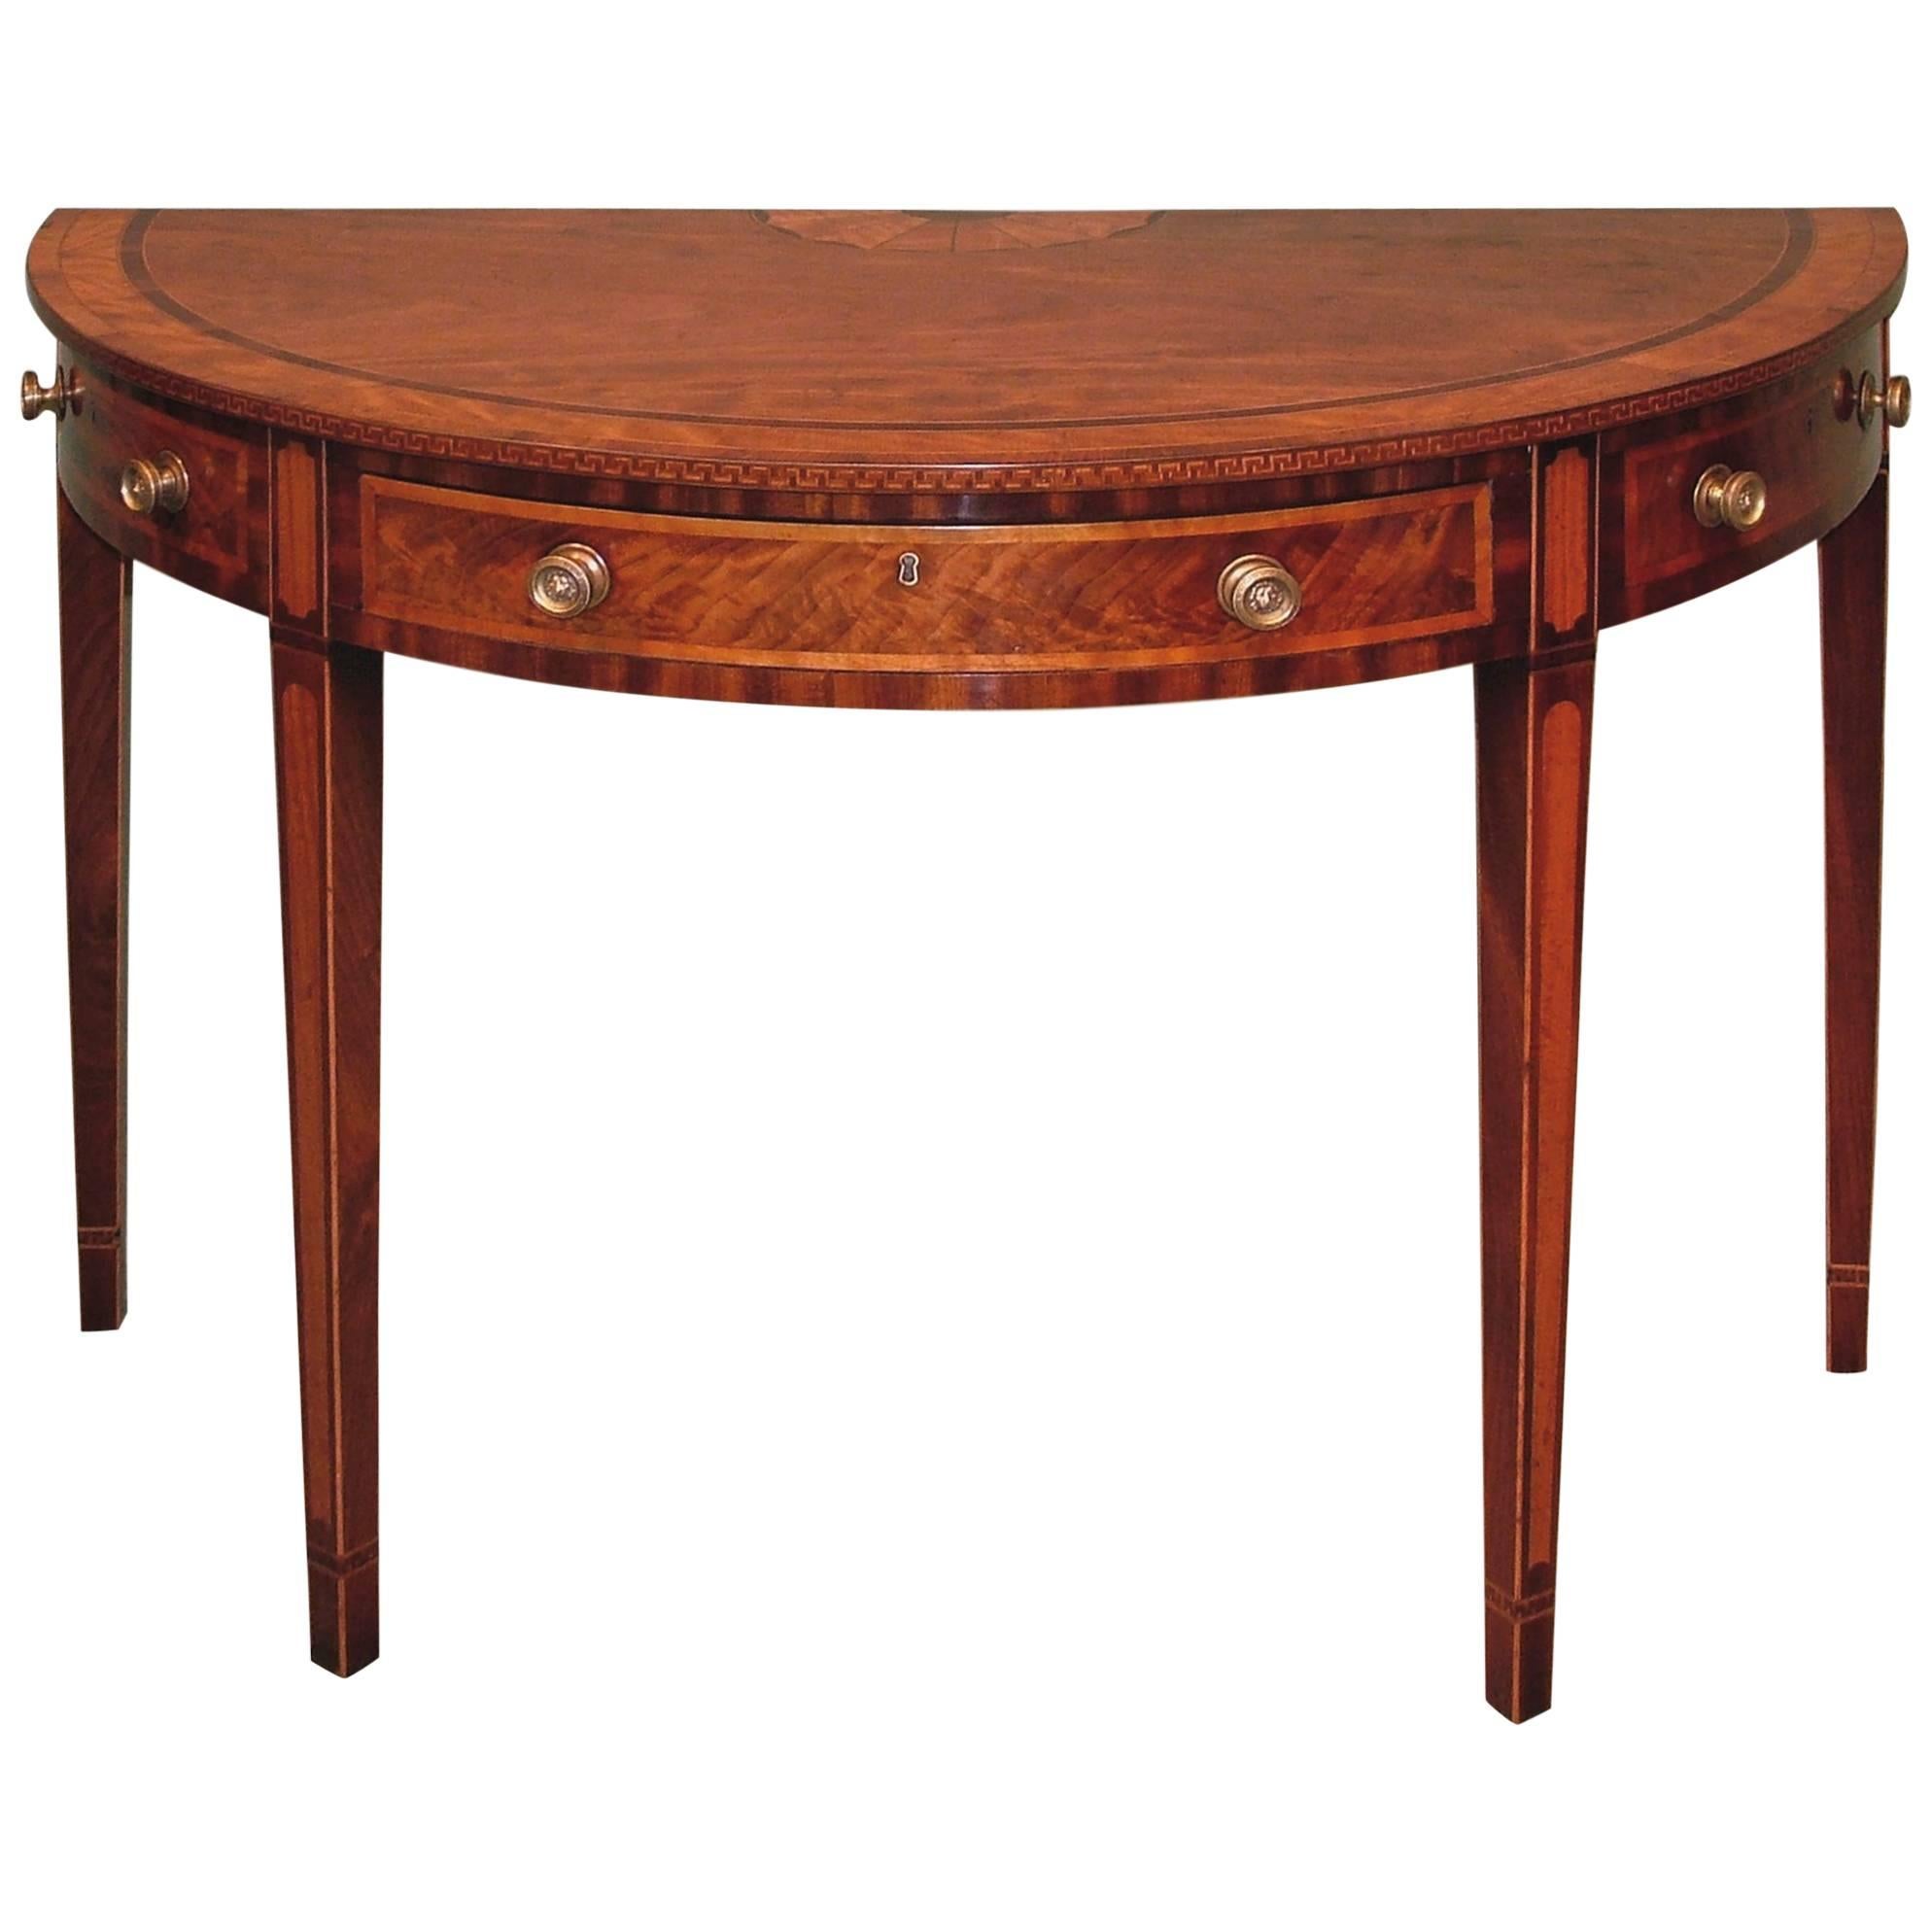 18th Century mahogany side table with half round top